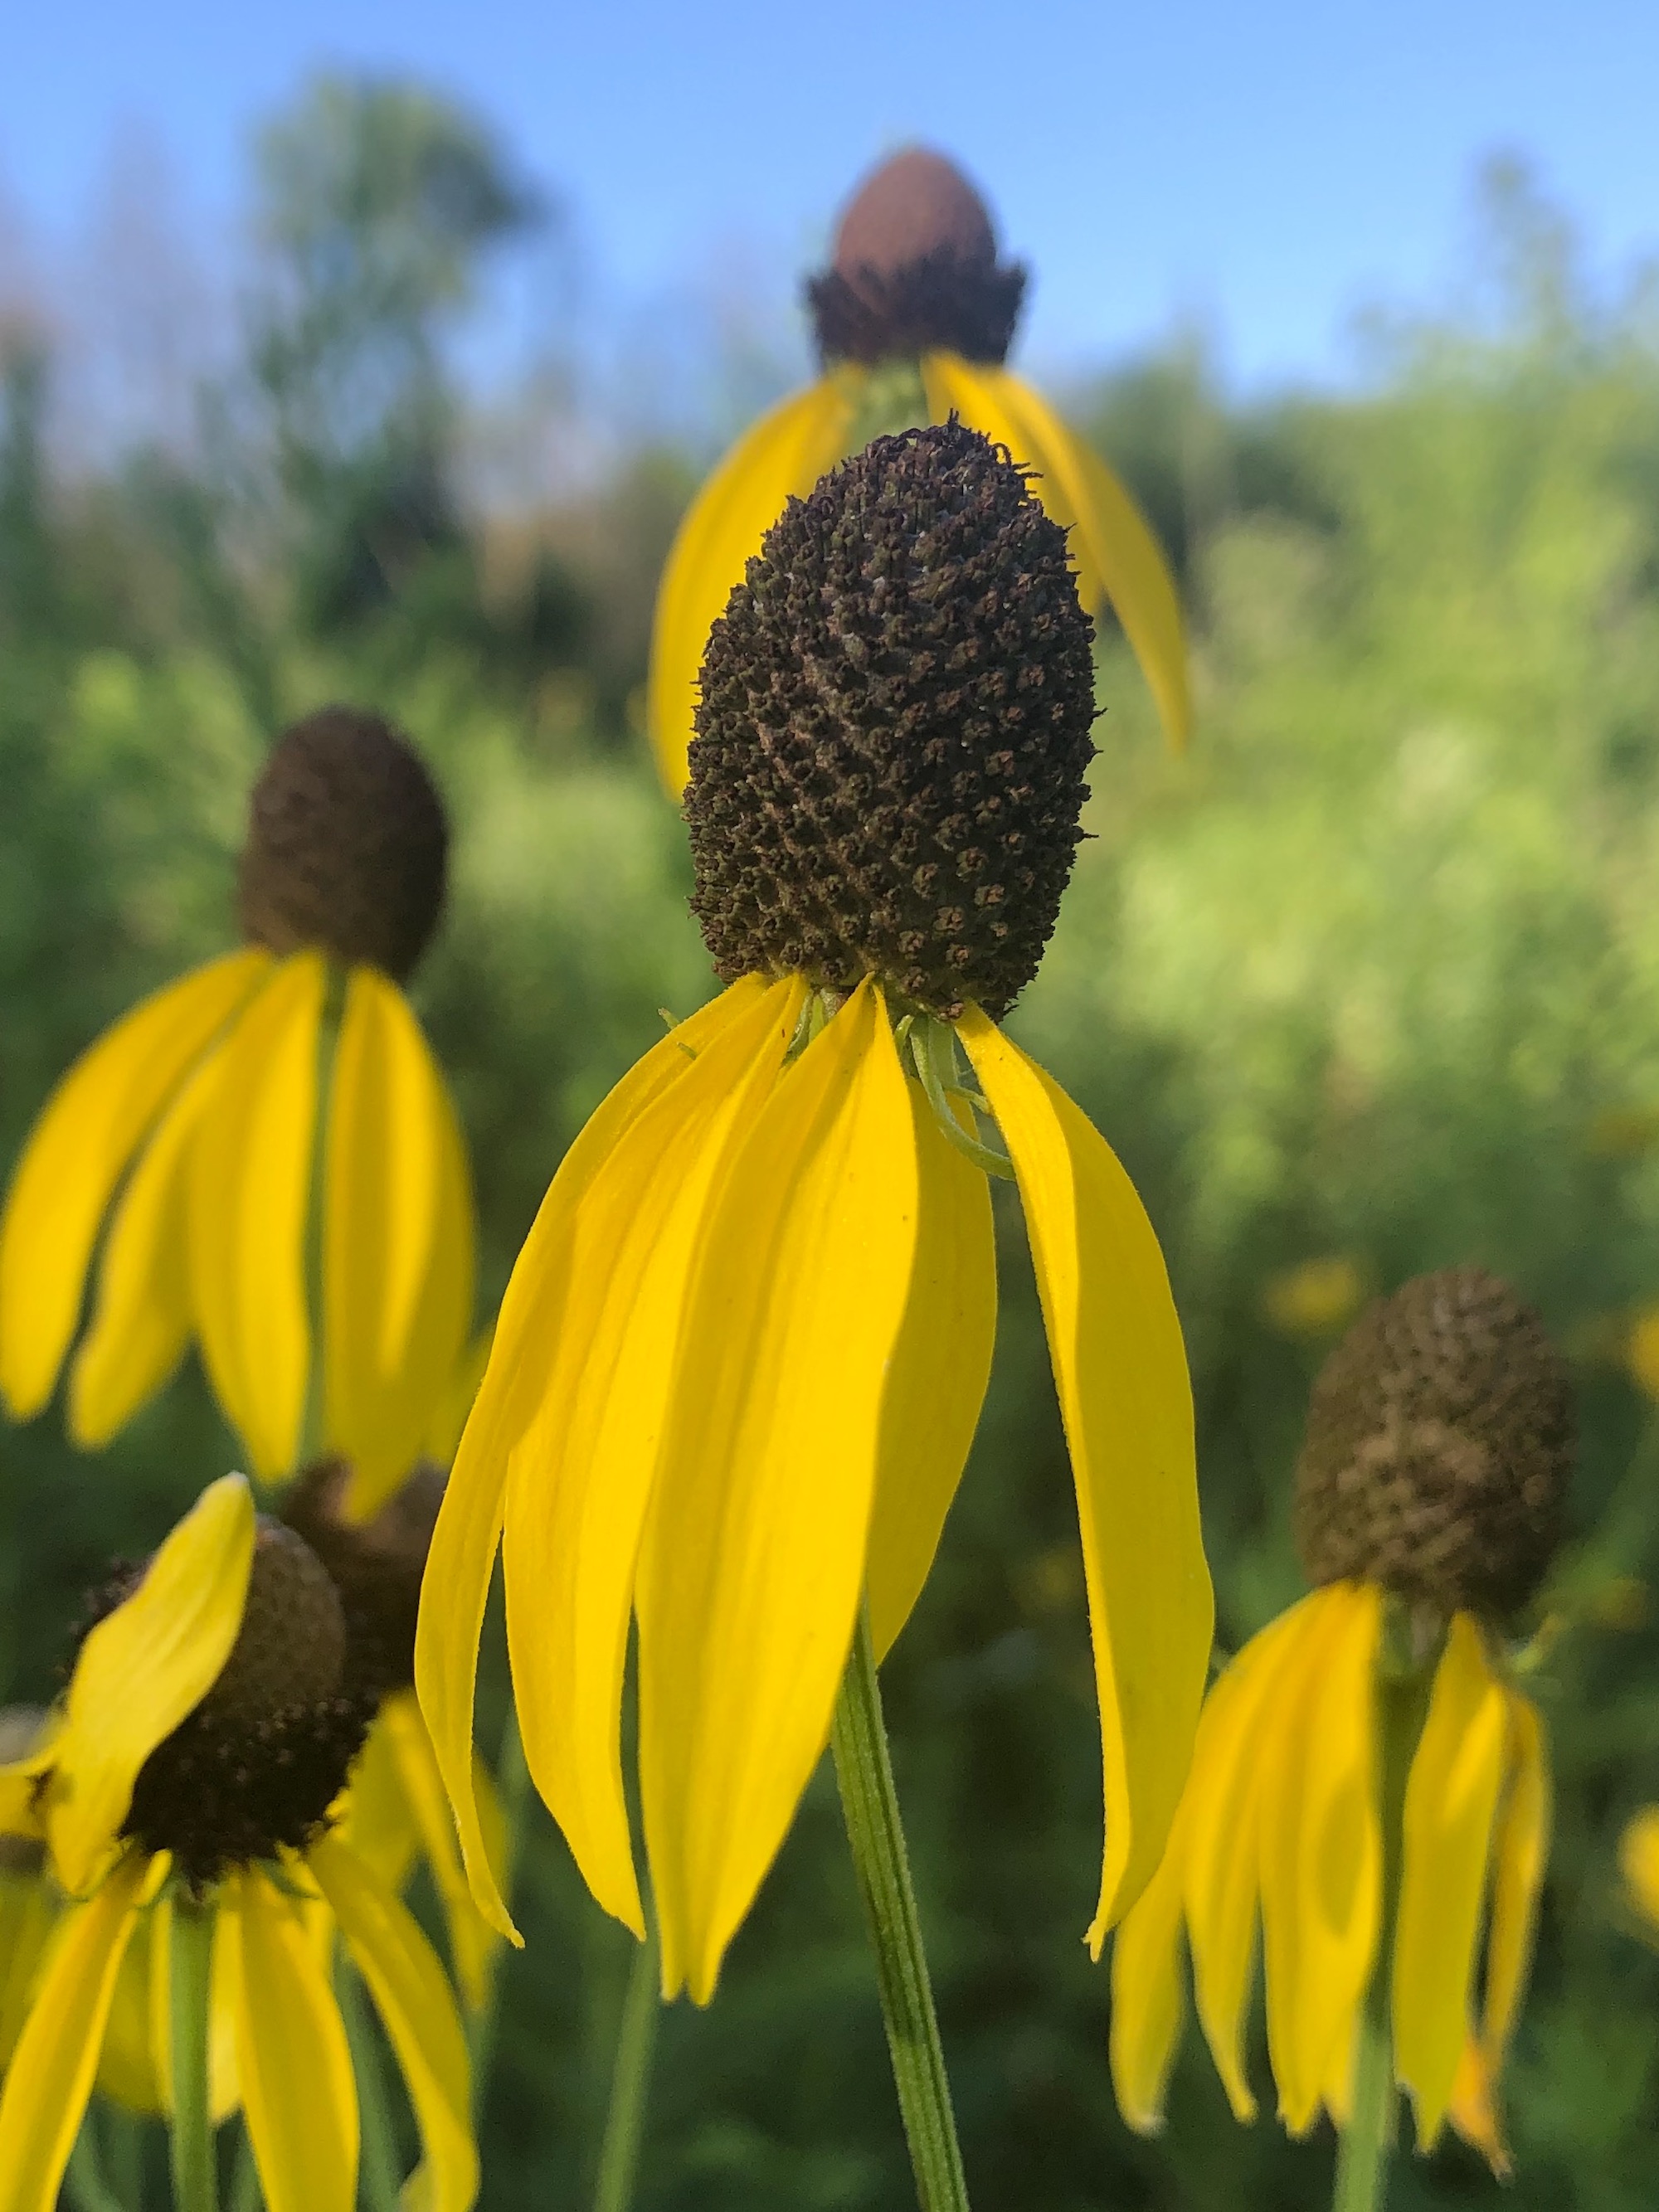 Gray-headed coneflower on shore of Marion Dunn Pond in Madison, Wisconsin on July 29, 2020.